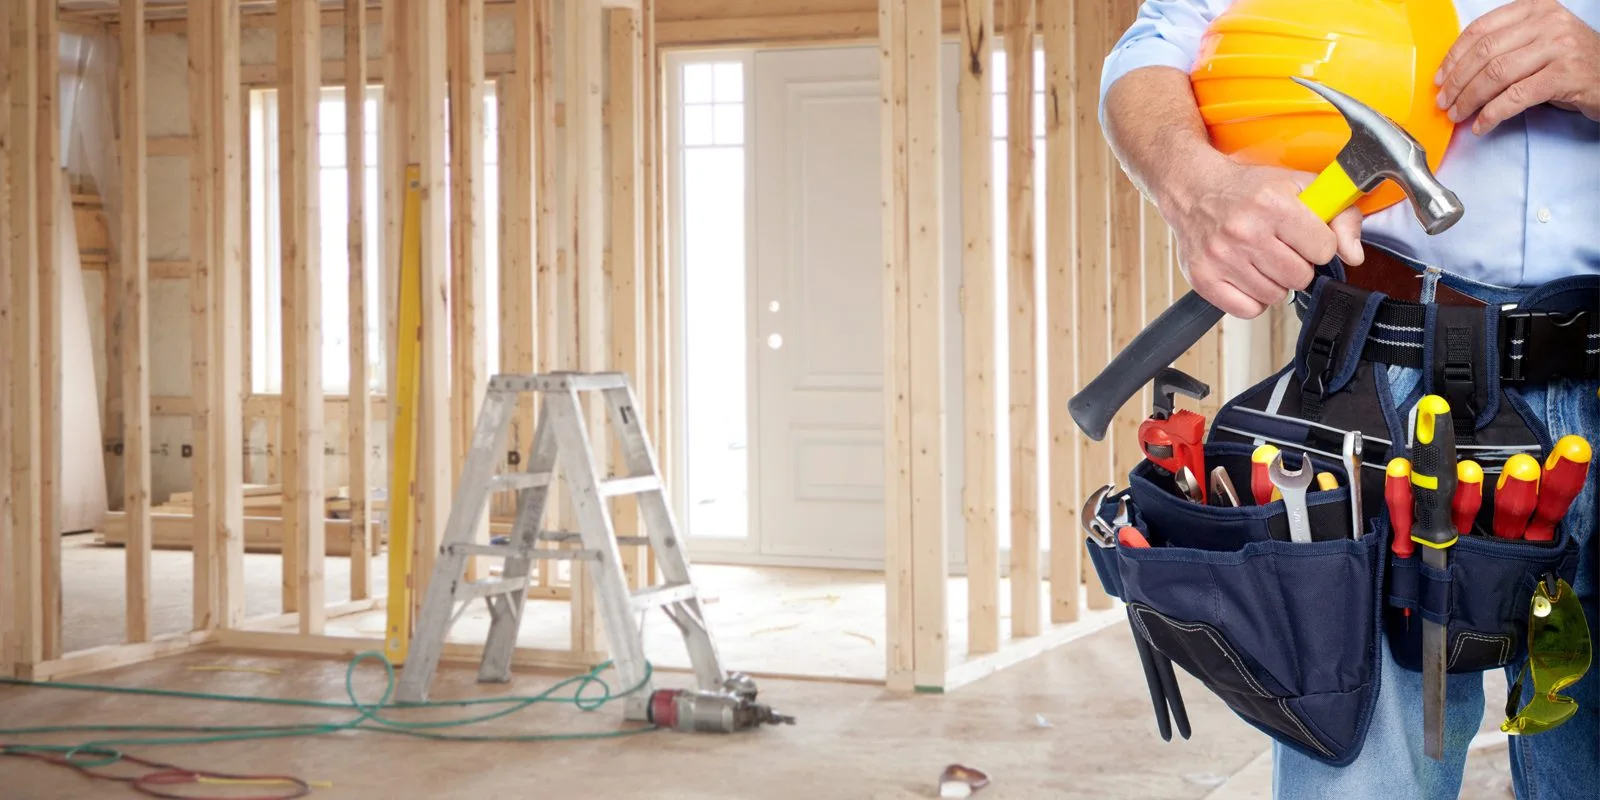 General Contractor Ratings Save Your Renovation